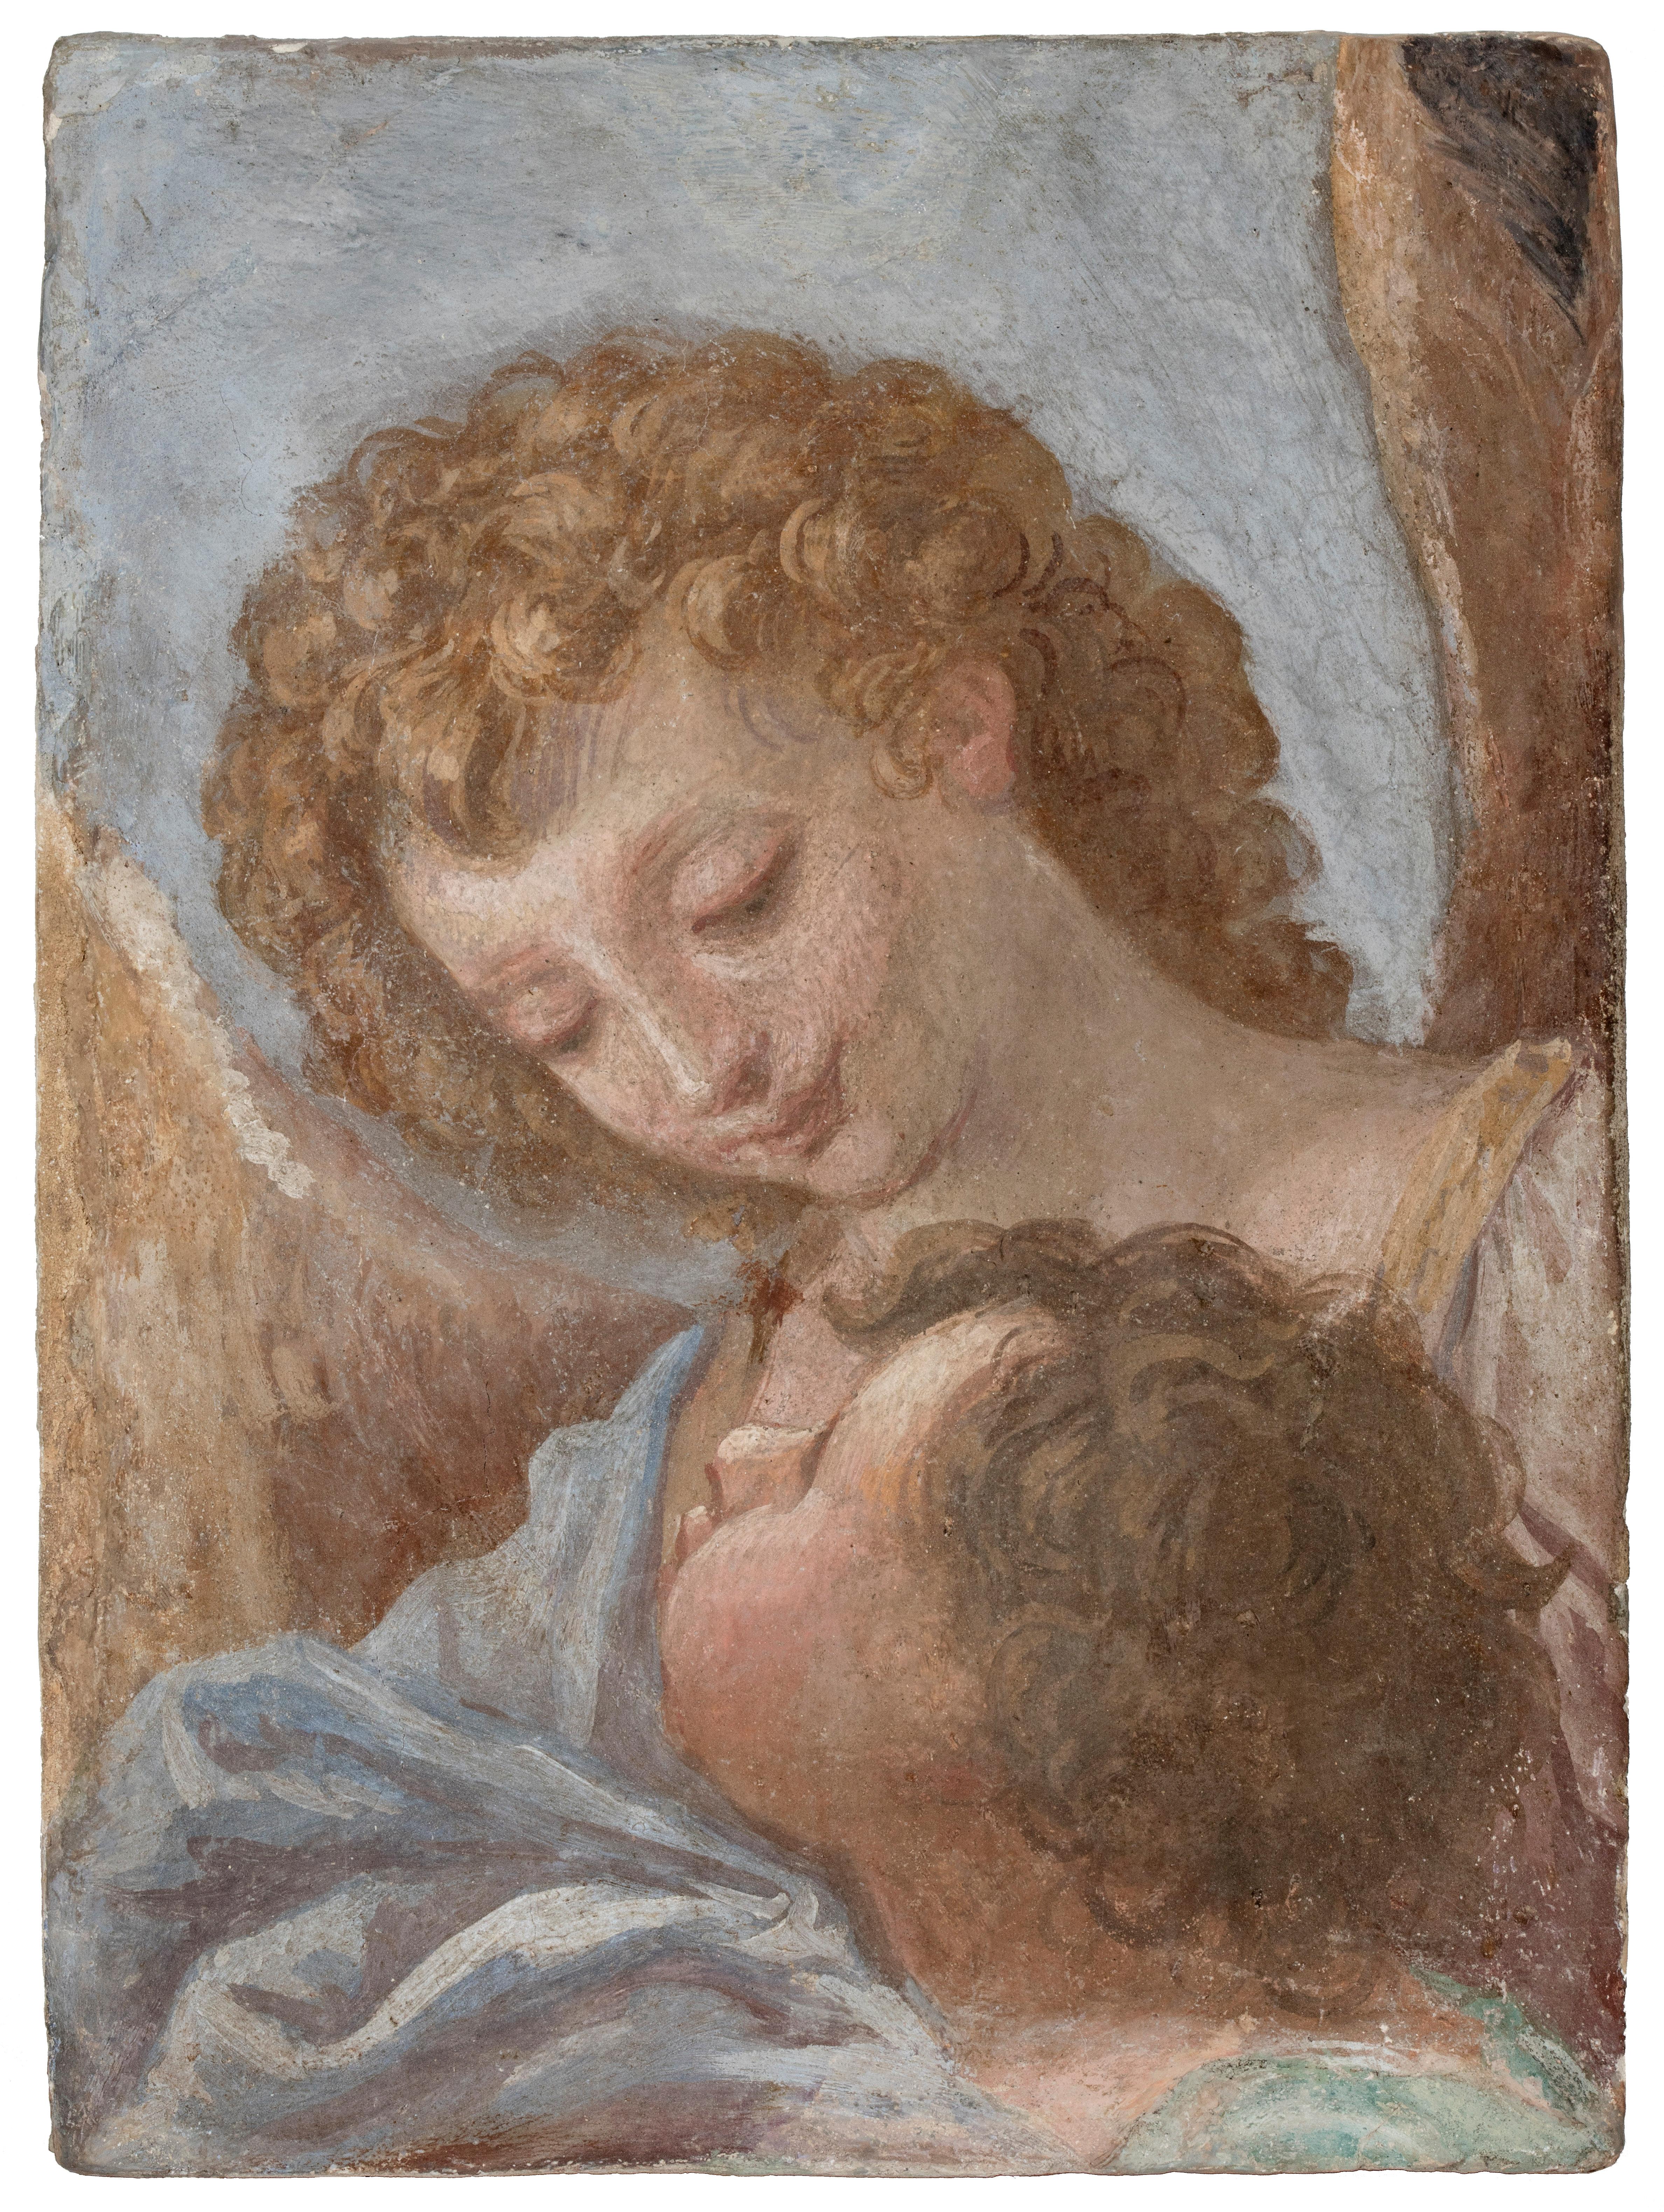 A Guardian Angel and a Child - Painting by Baldassarre Franceschini, called Il Volterrano